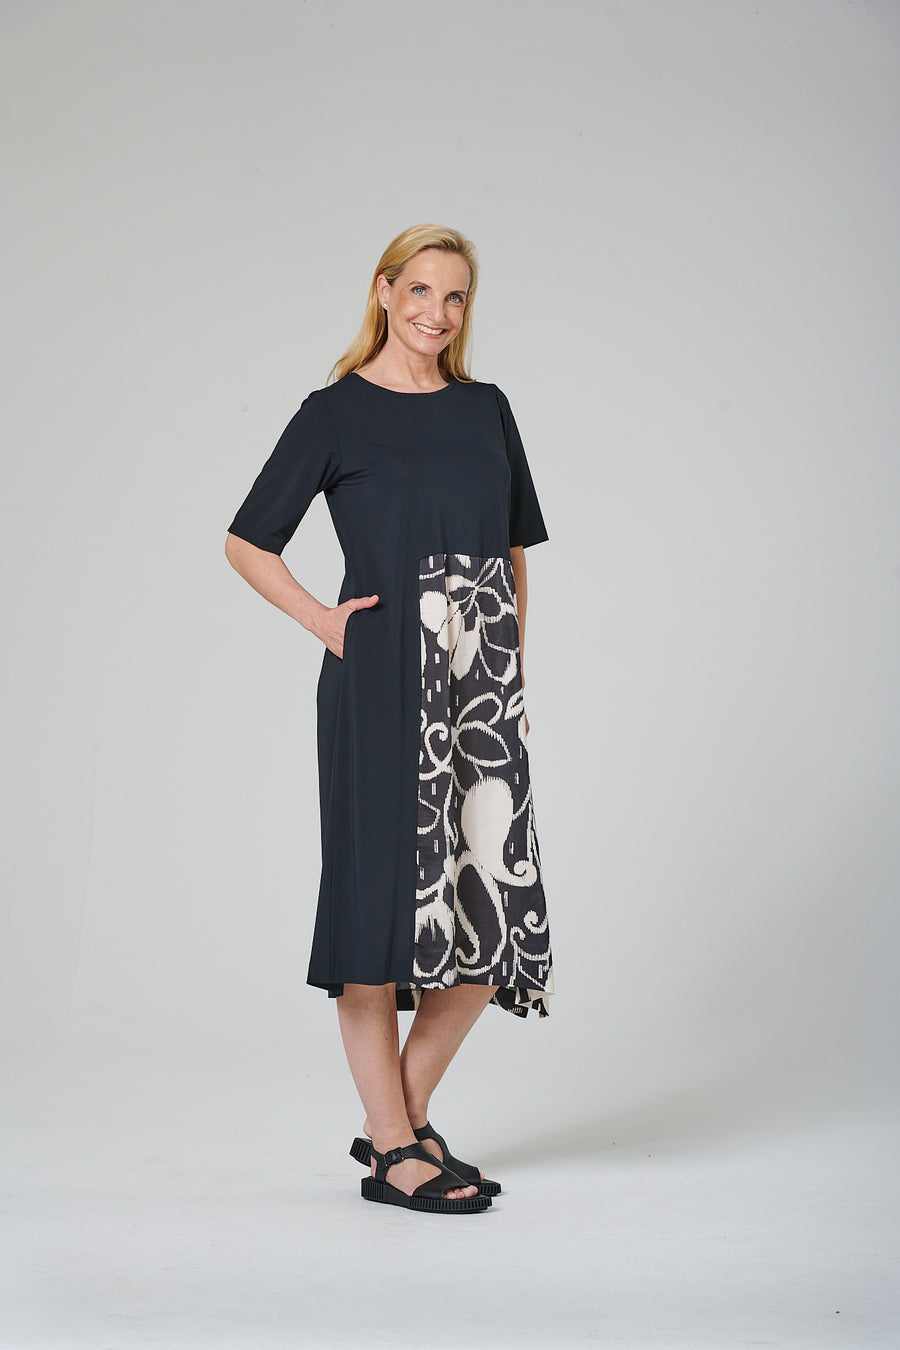 Dress made of printed viscose + viscose jersey blend fabric (330k2) in two print variants